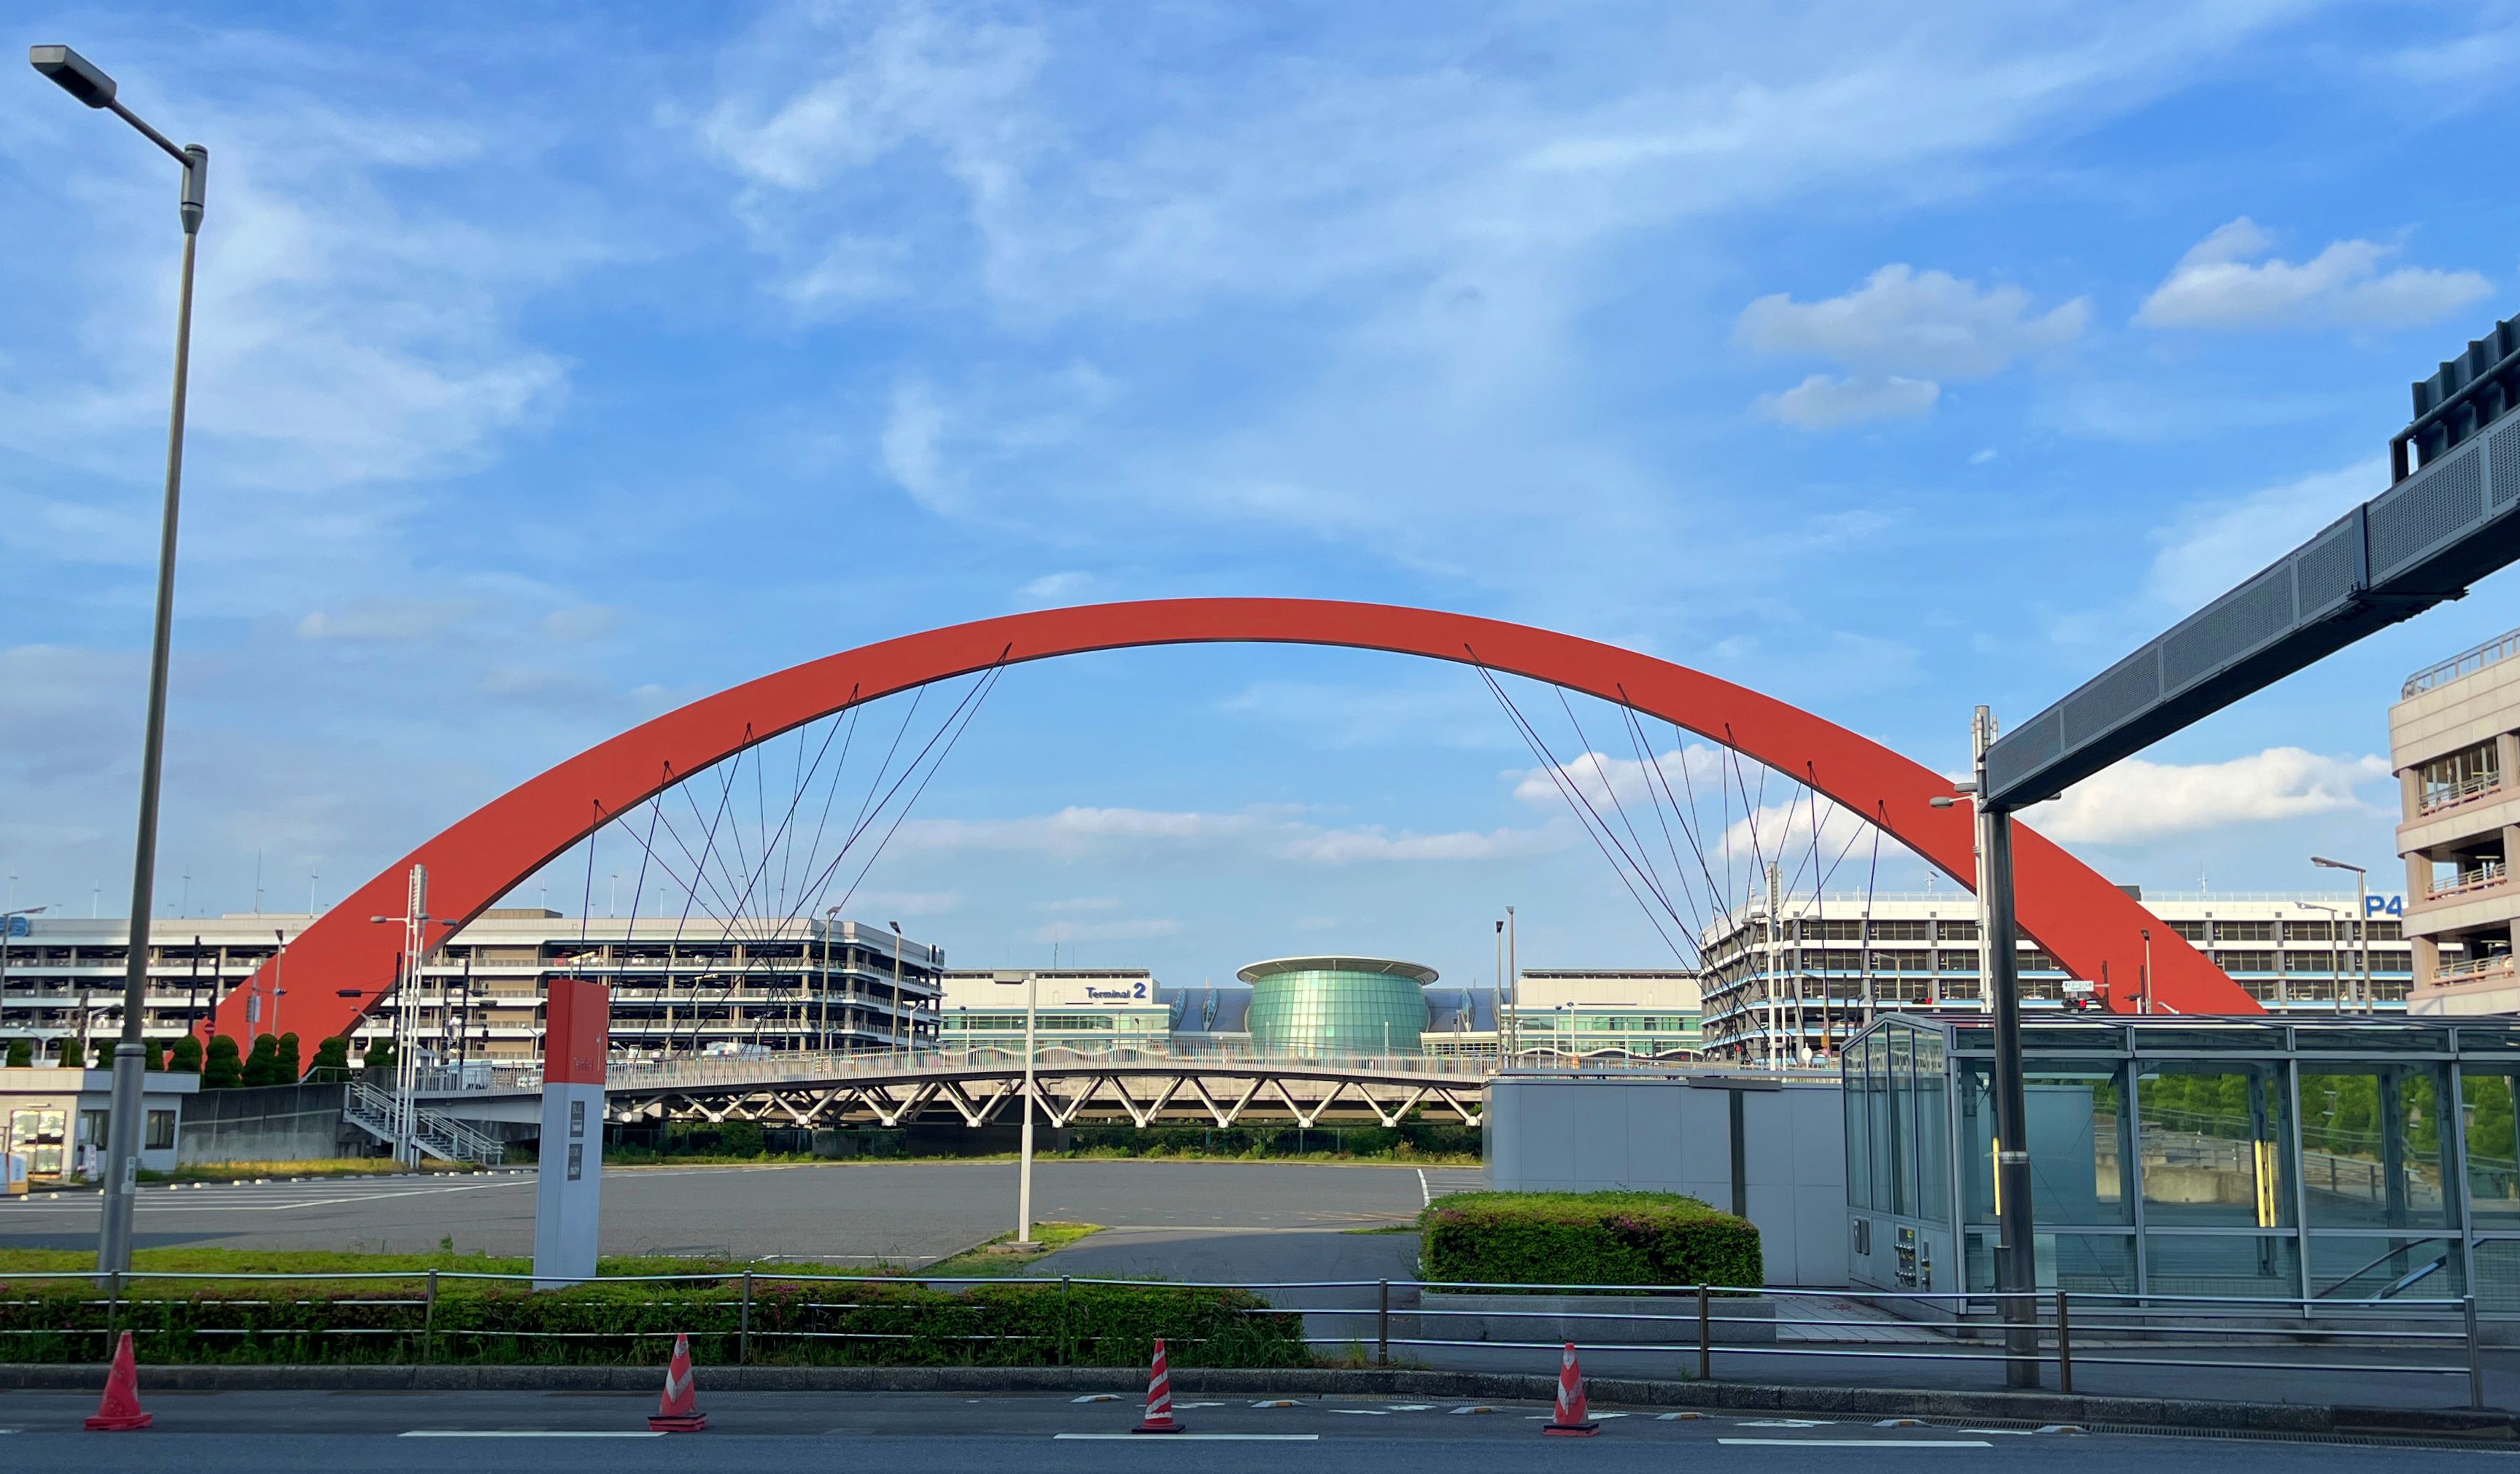 A large red arch between Terminals 1 and 2 at HND.